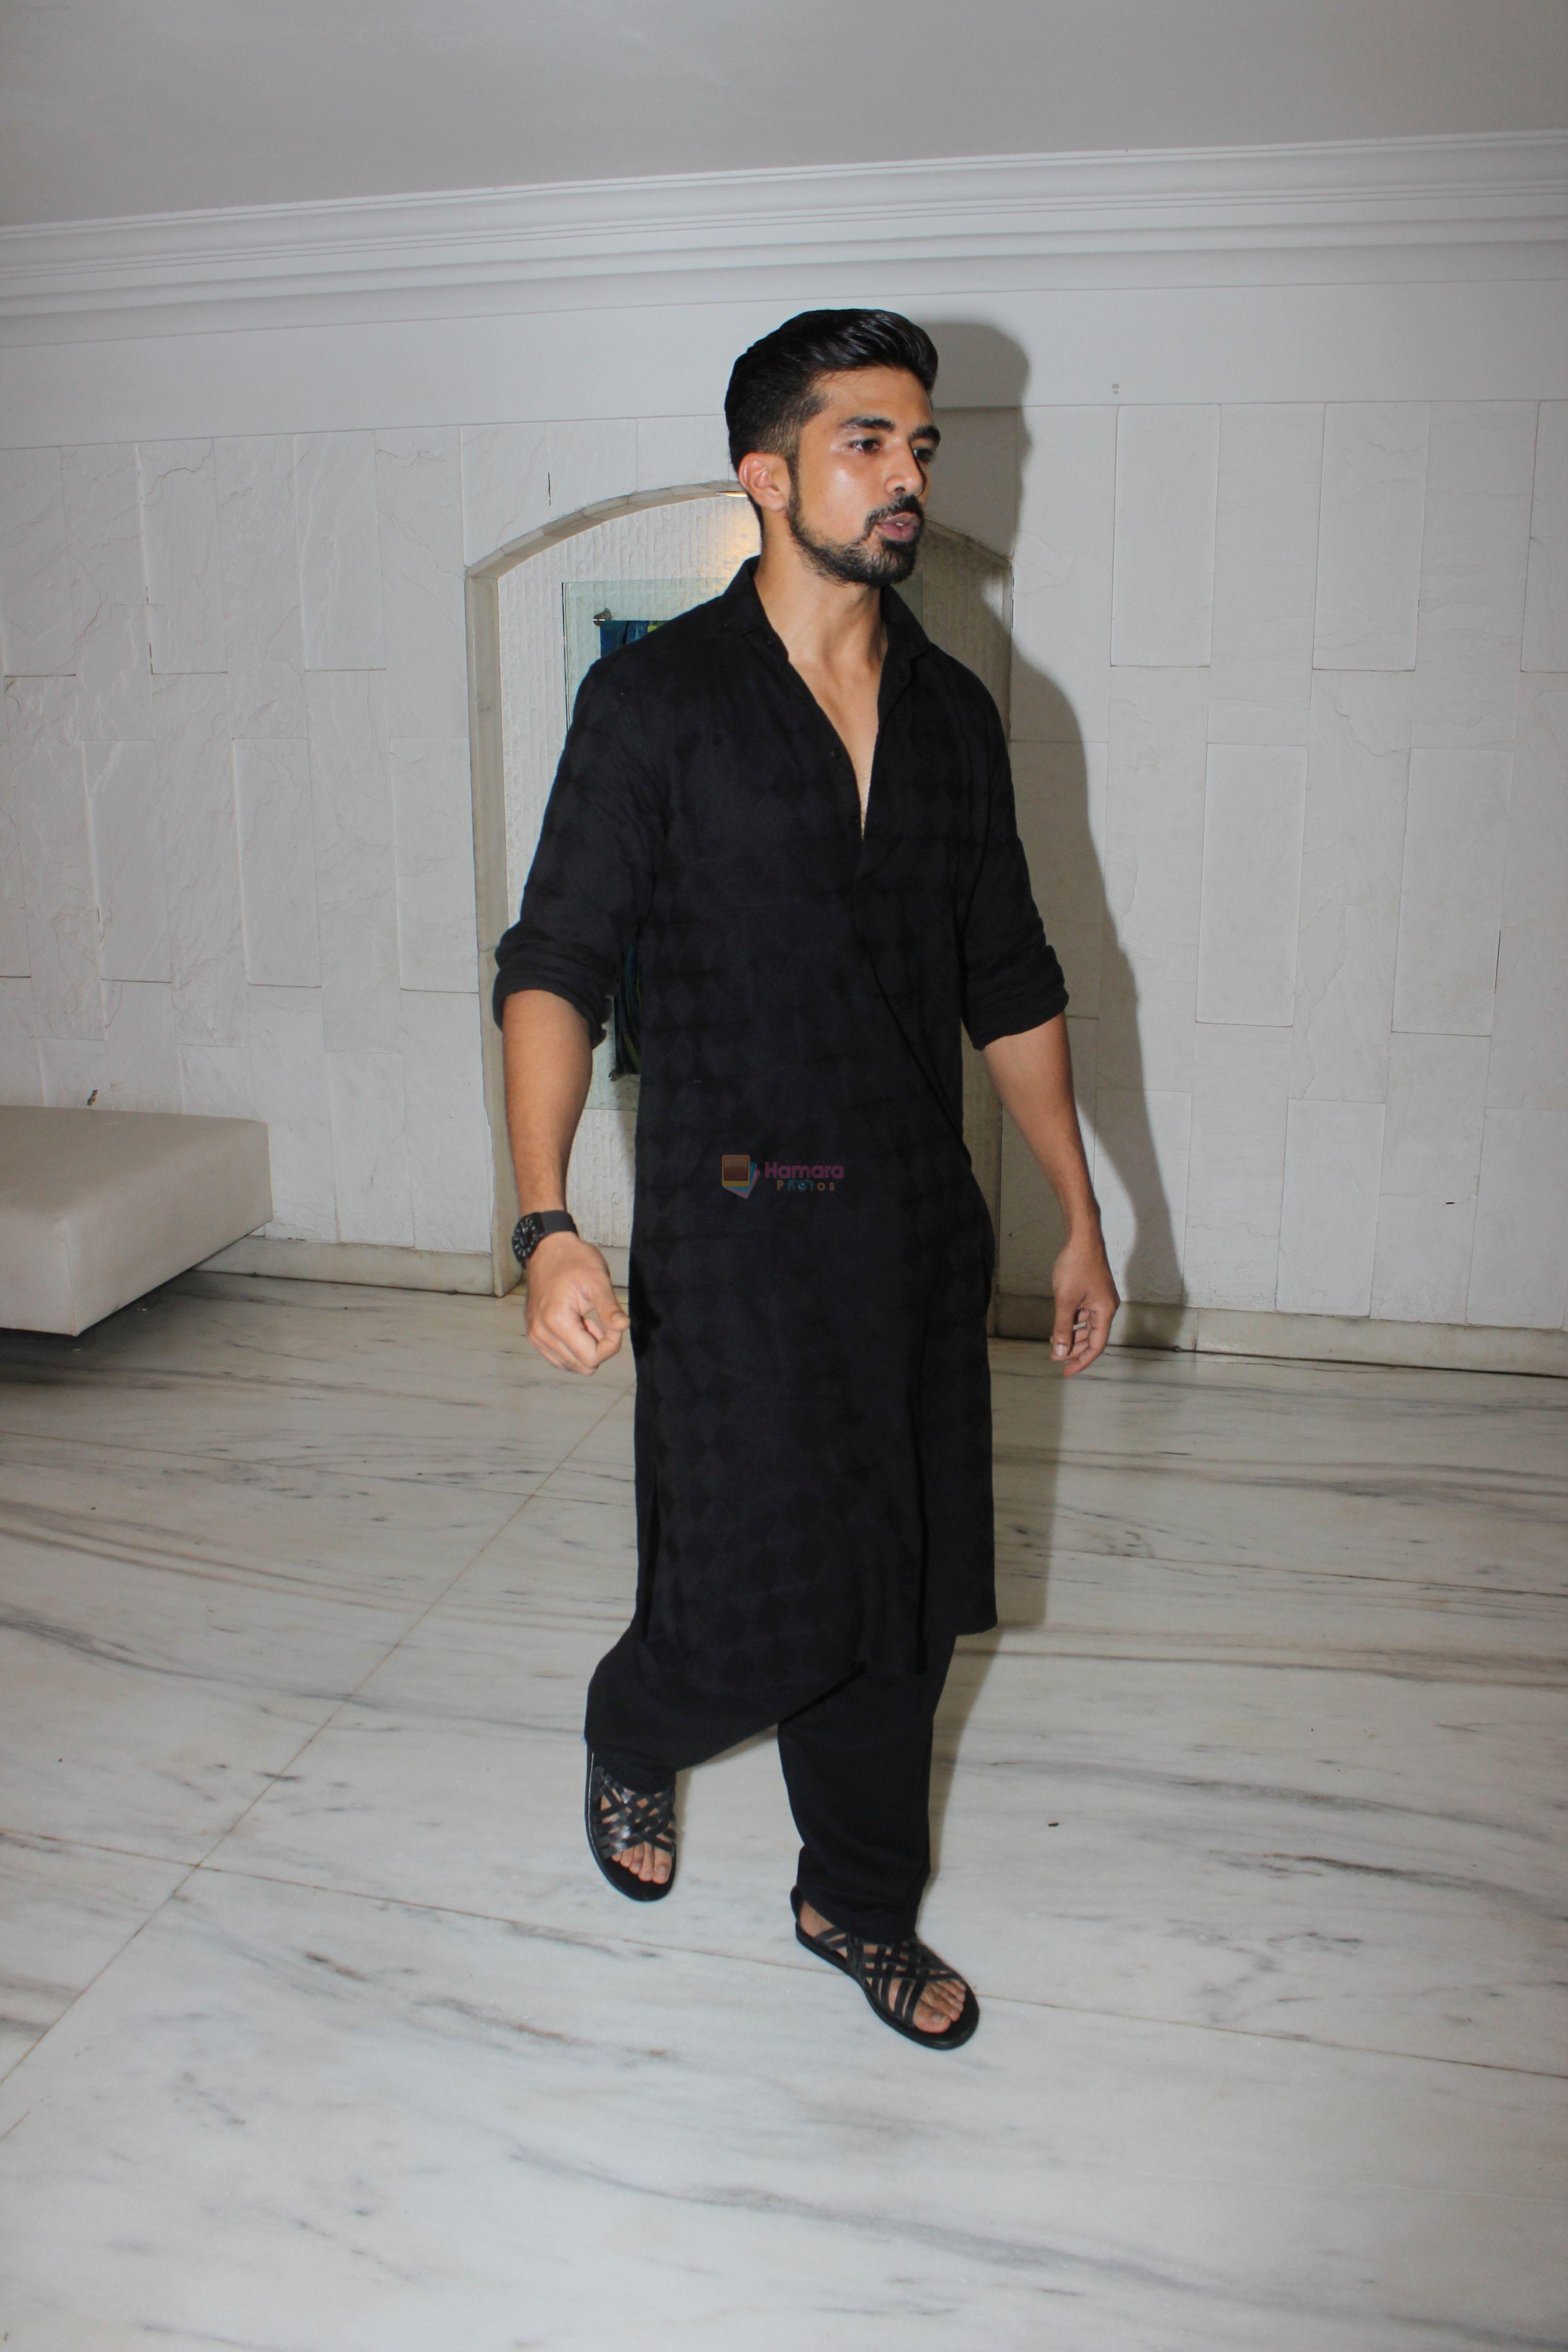 Saqib Saleem celebrated by giving Eid Party on 28th June 2017